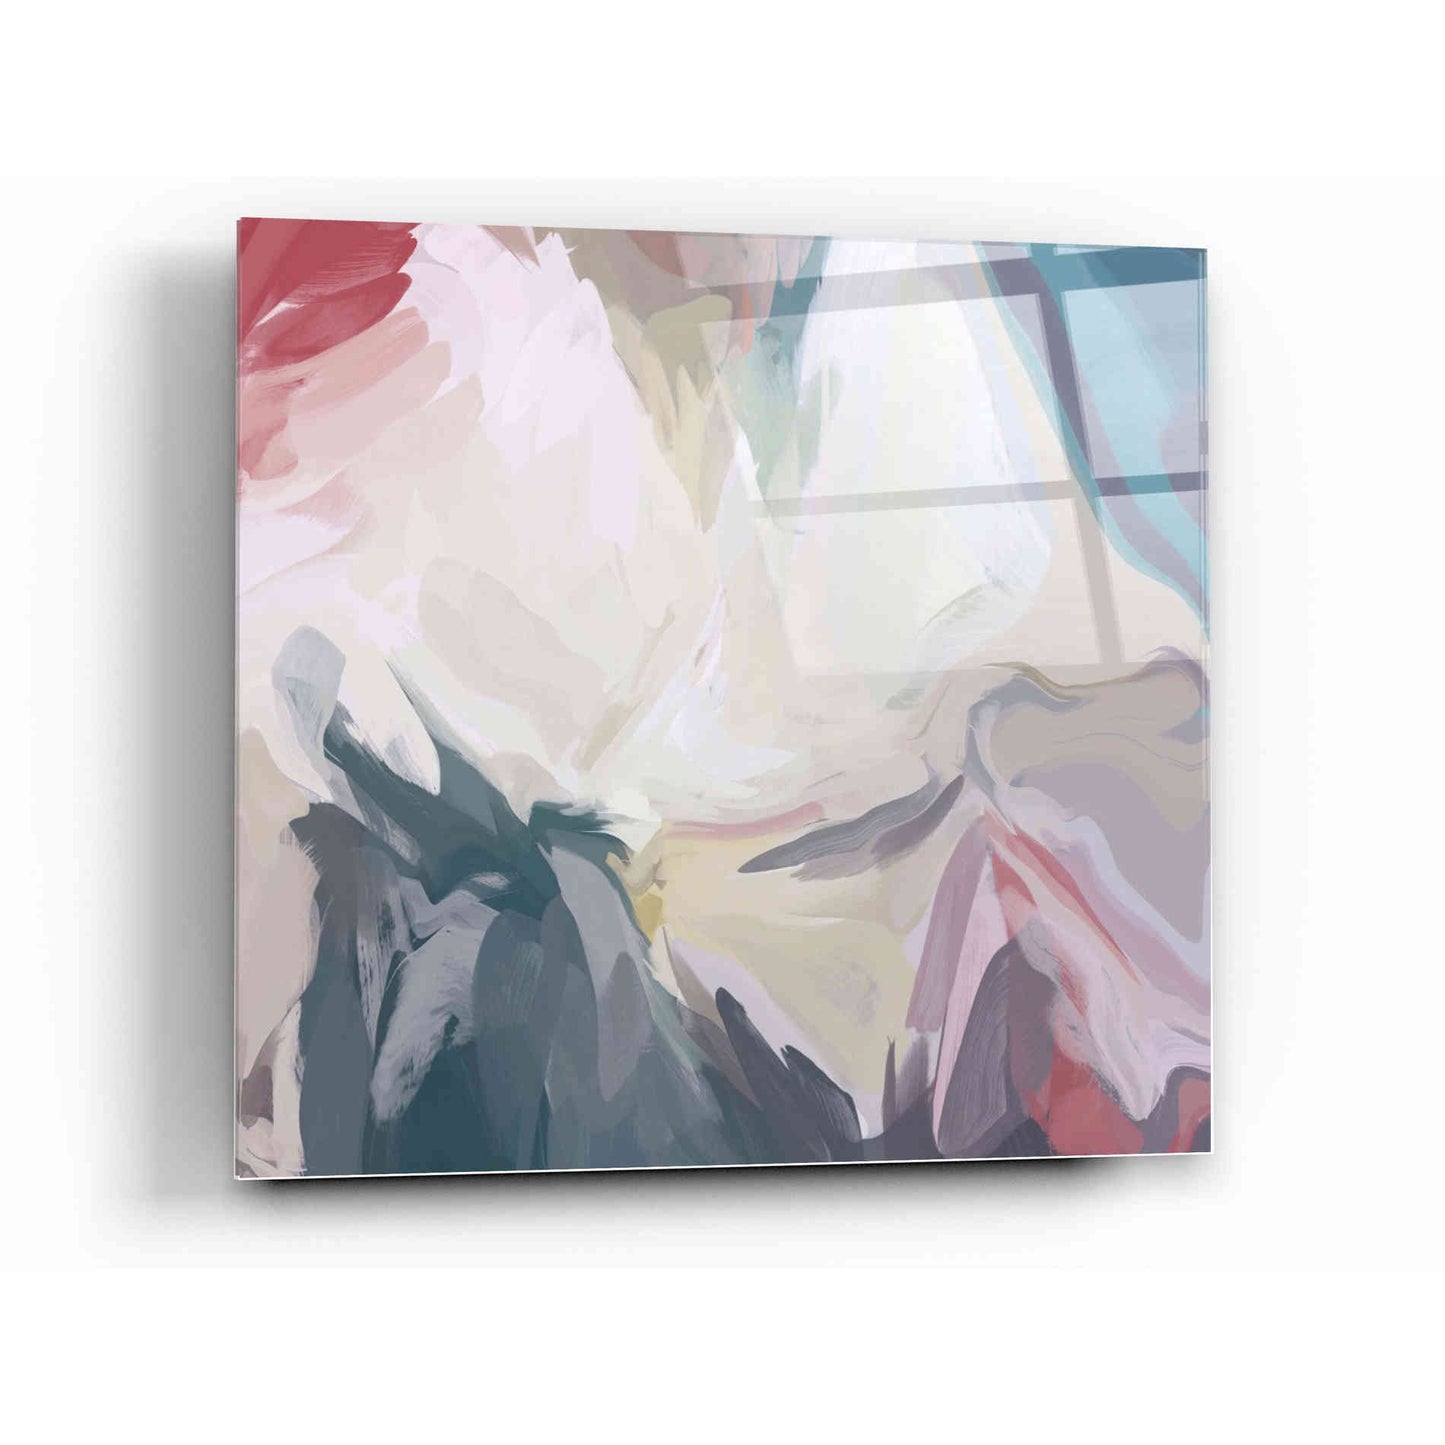 Epic Art 'From Day to Day 5' by Irena Orlov, Acrylic Glass Wall Art,12x12